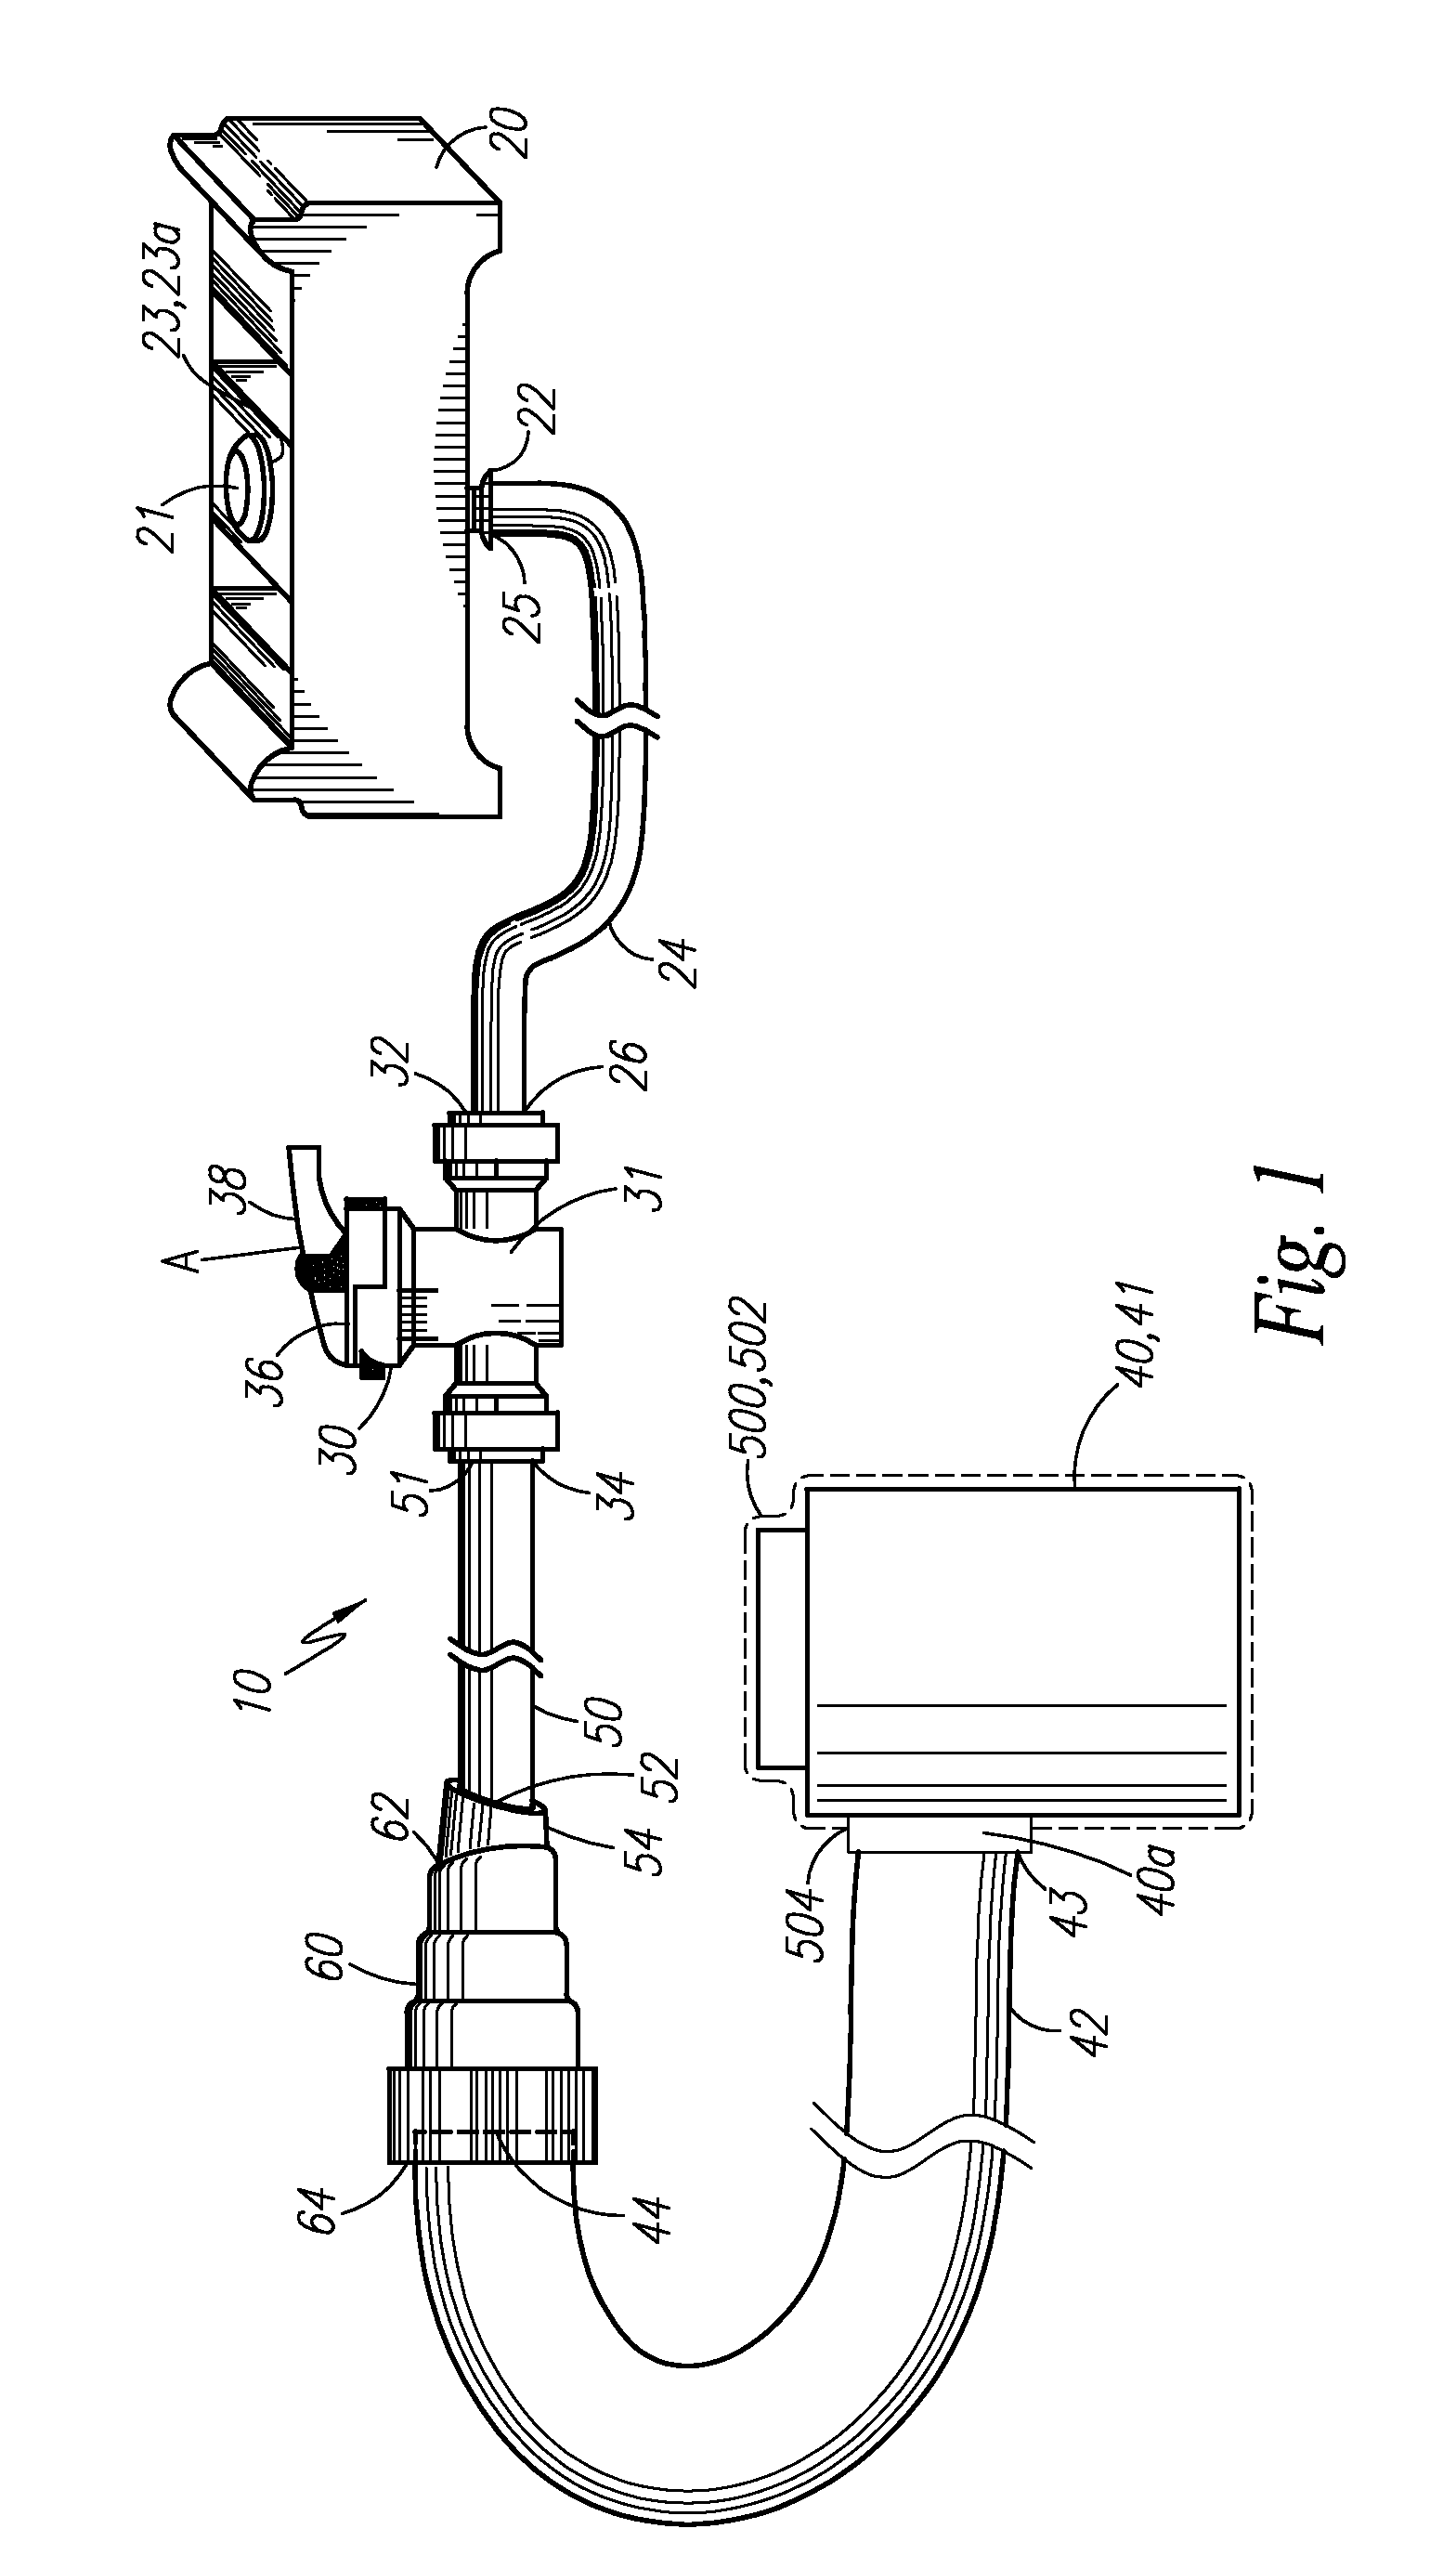 Airborne particle and microorganism collection system